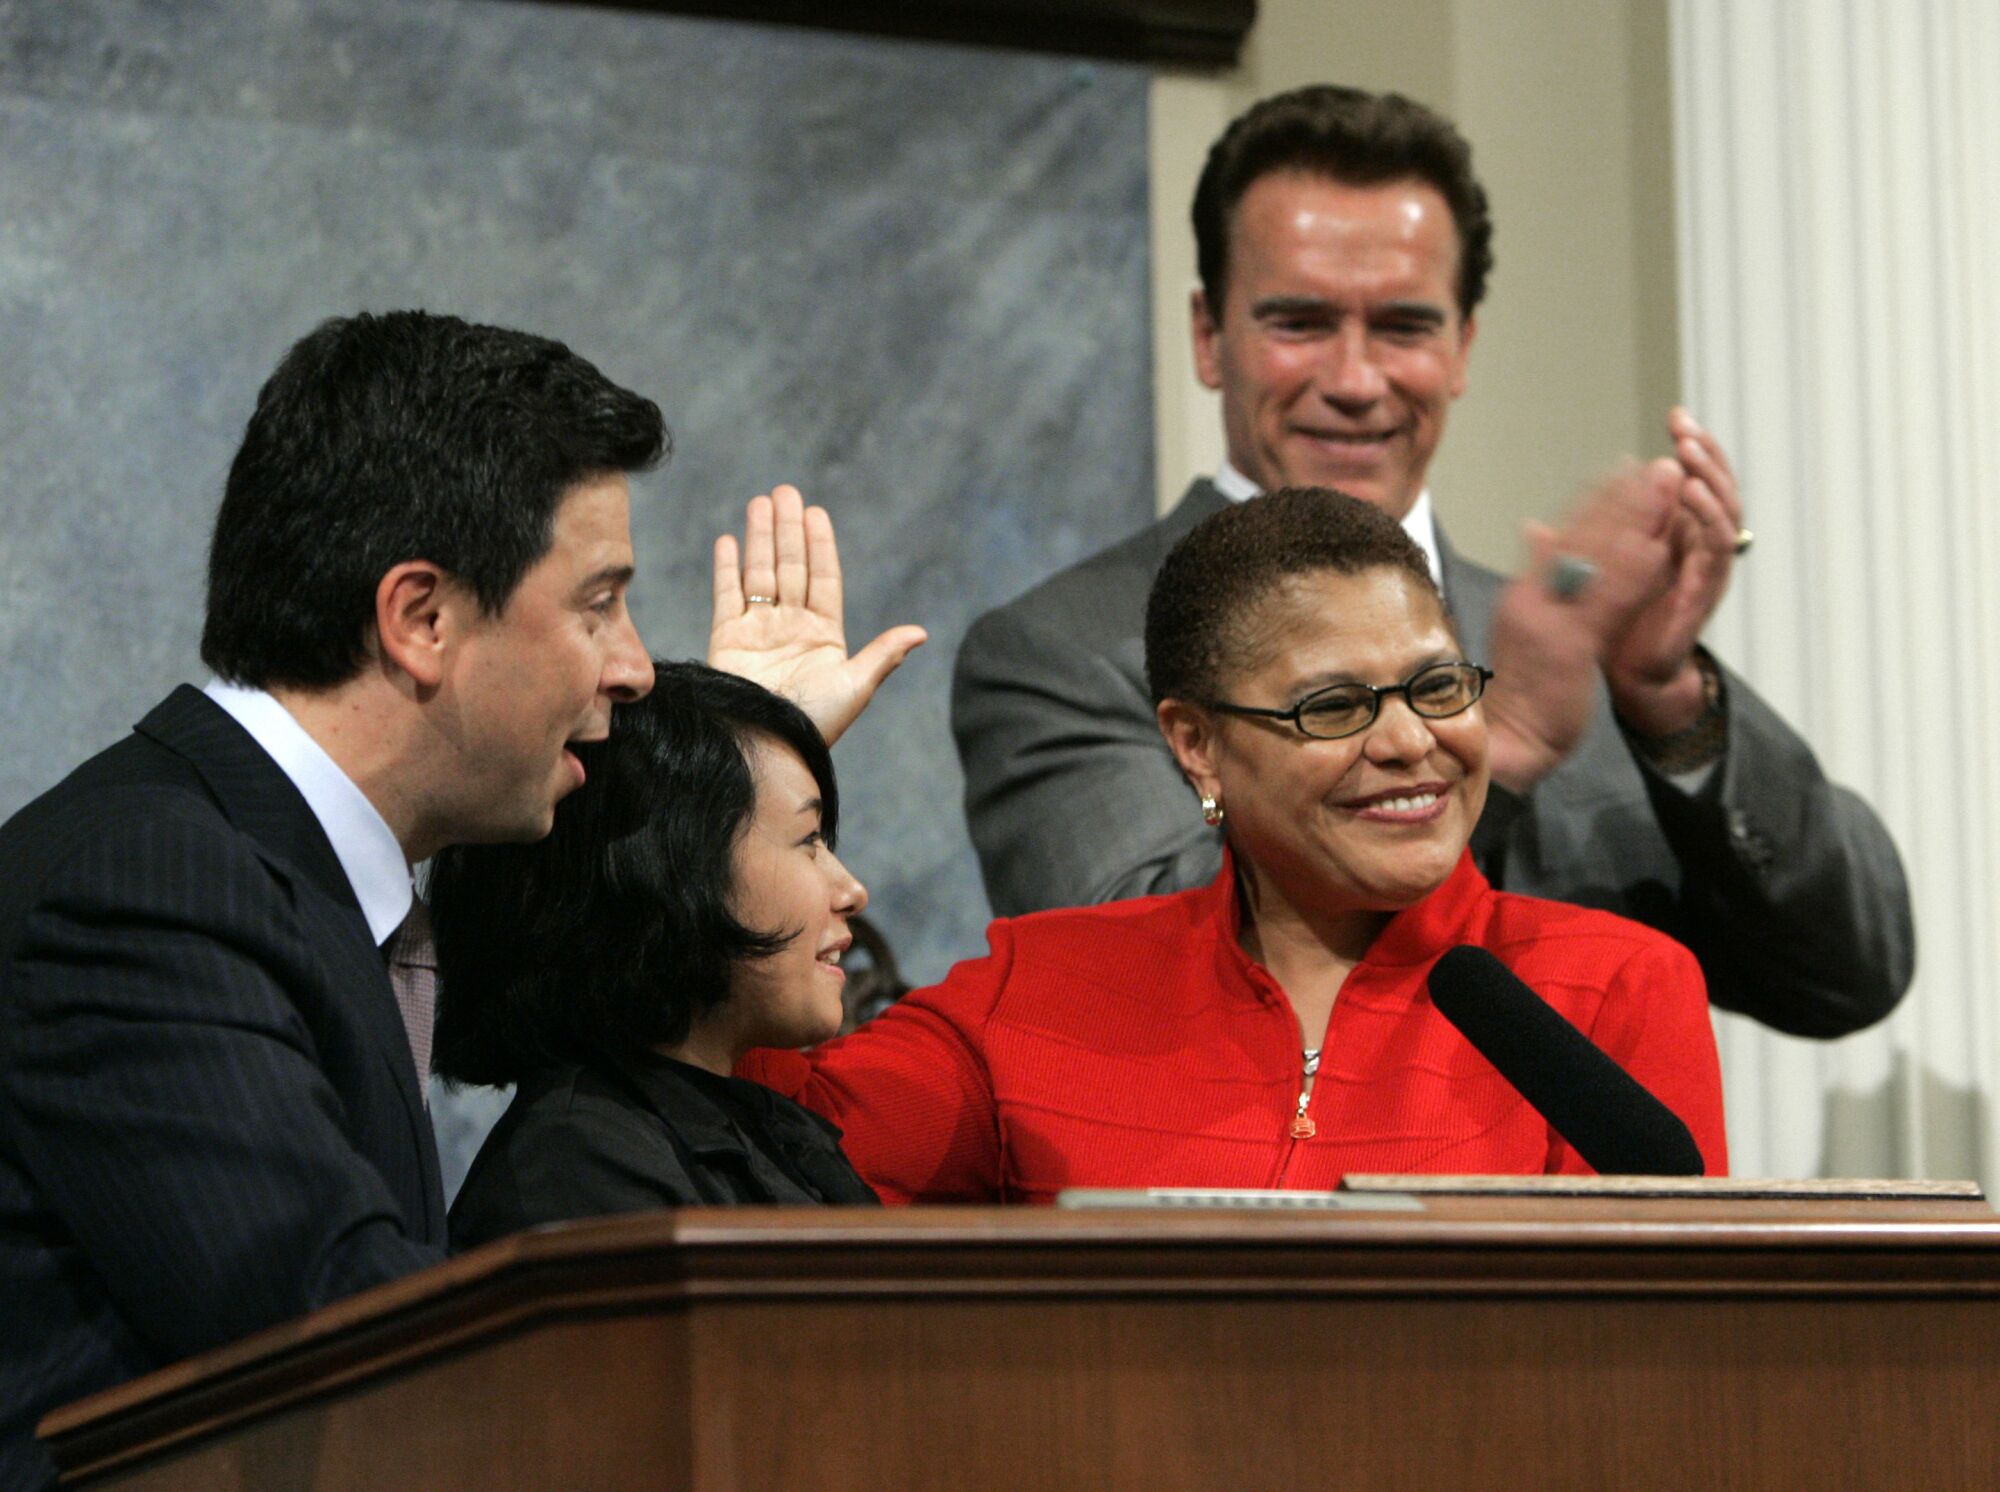 Assemblywoman Karen Bass, second from right, smiles as she is sworn in as speaker of the California State Assembly in 2008.